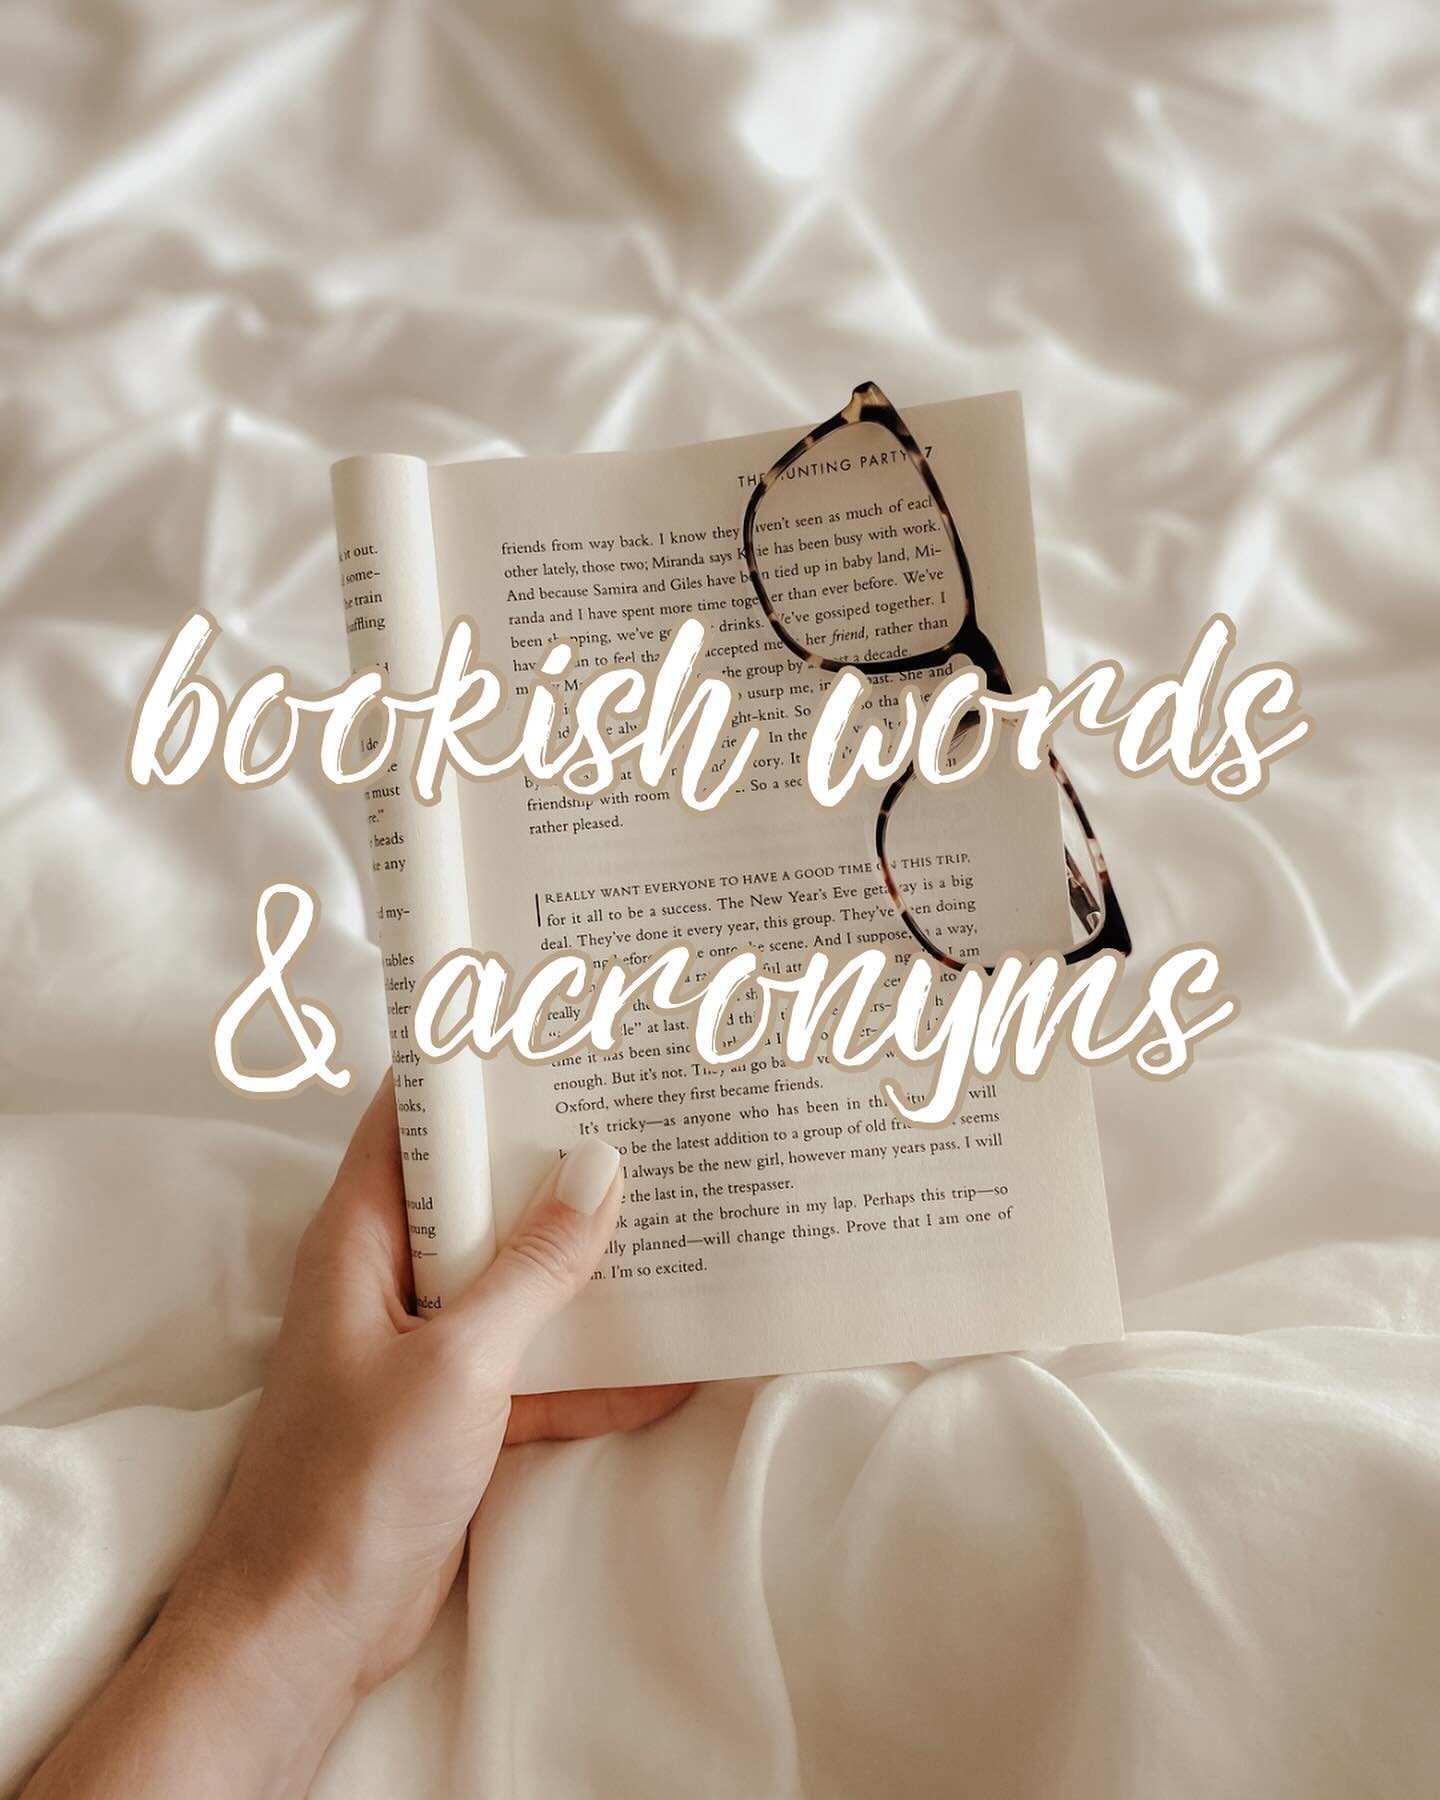 Just for fun, and in case anyone here has ever been like what the heck is she talking about 🤔🙂 This edition is mostly acronyms, but these are some of the basics defined / ones I&rsquo;ve used often!

💭 What bookish acronym has always tripped you u